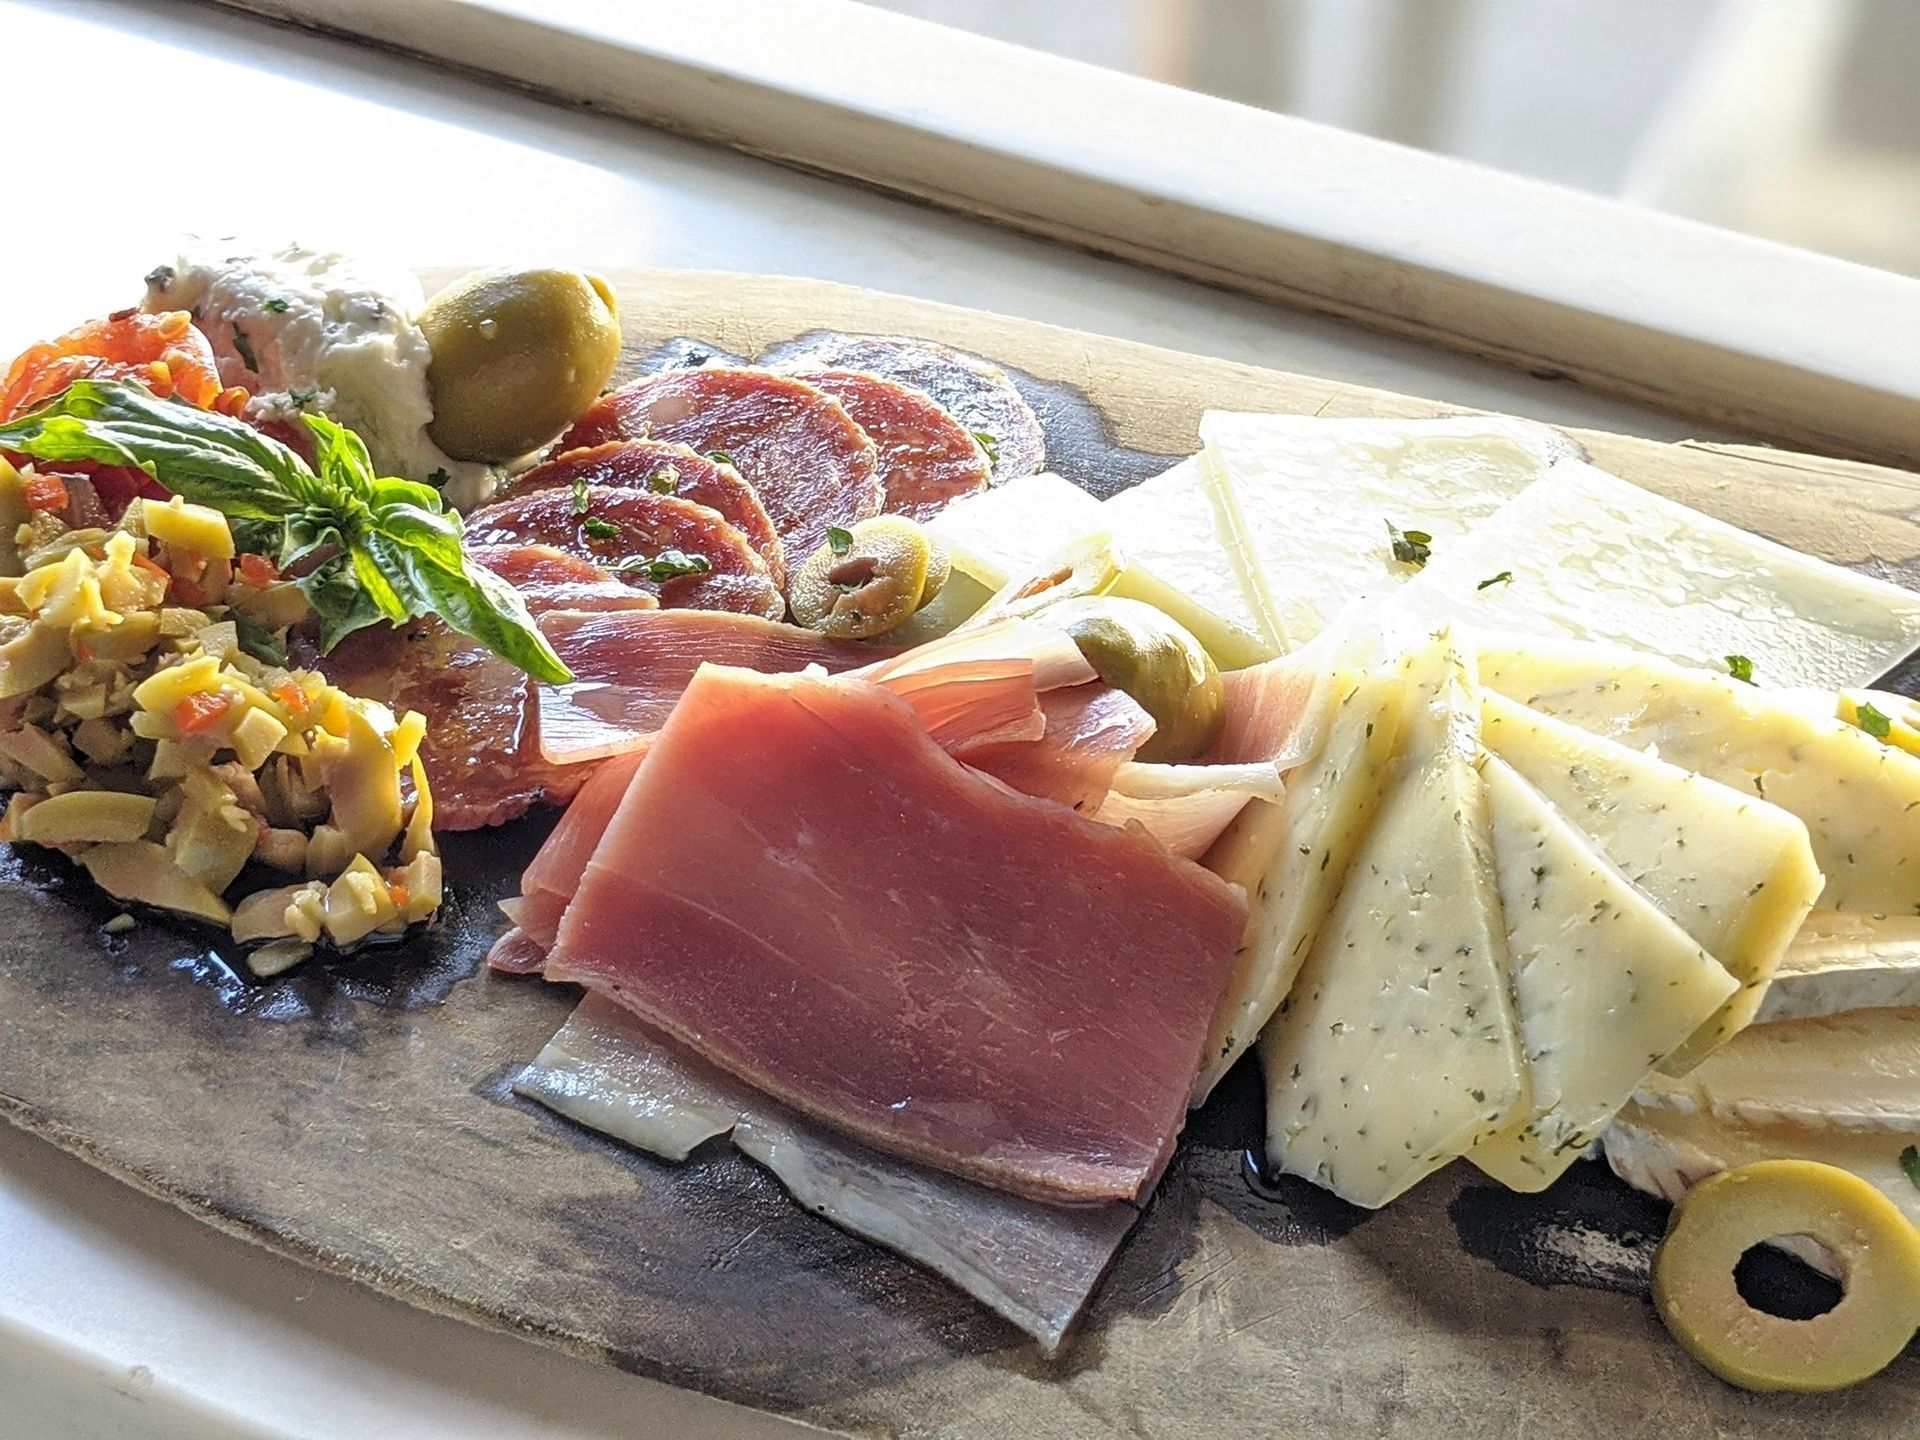 Pairing Charcuterie and Cheese
